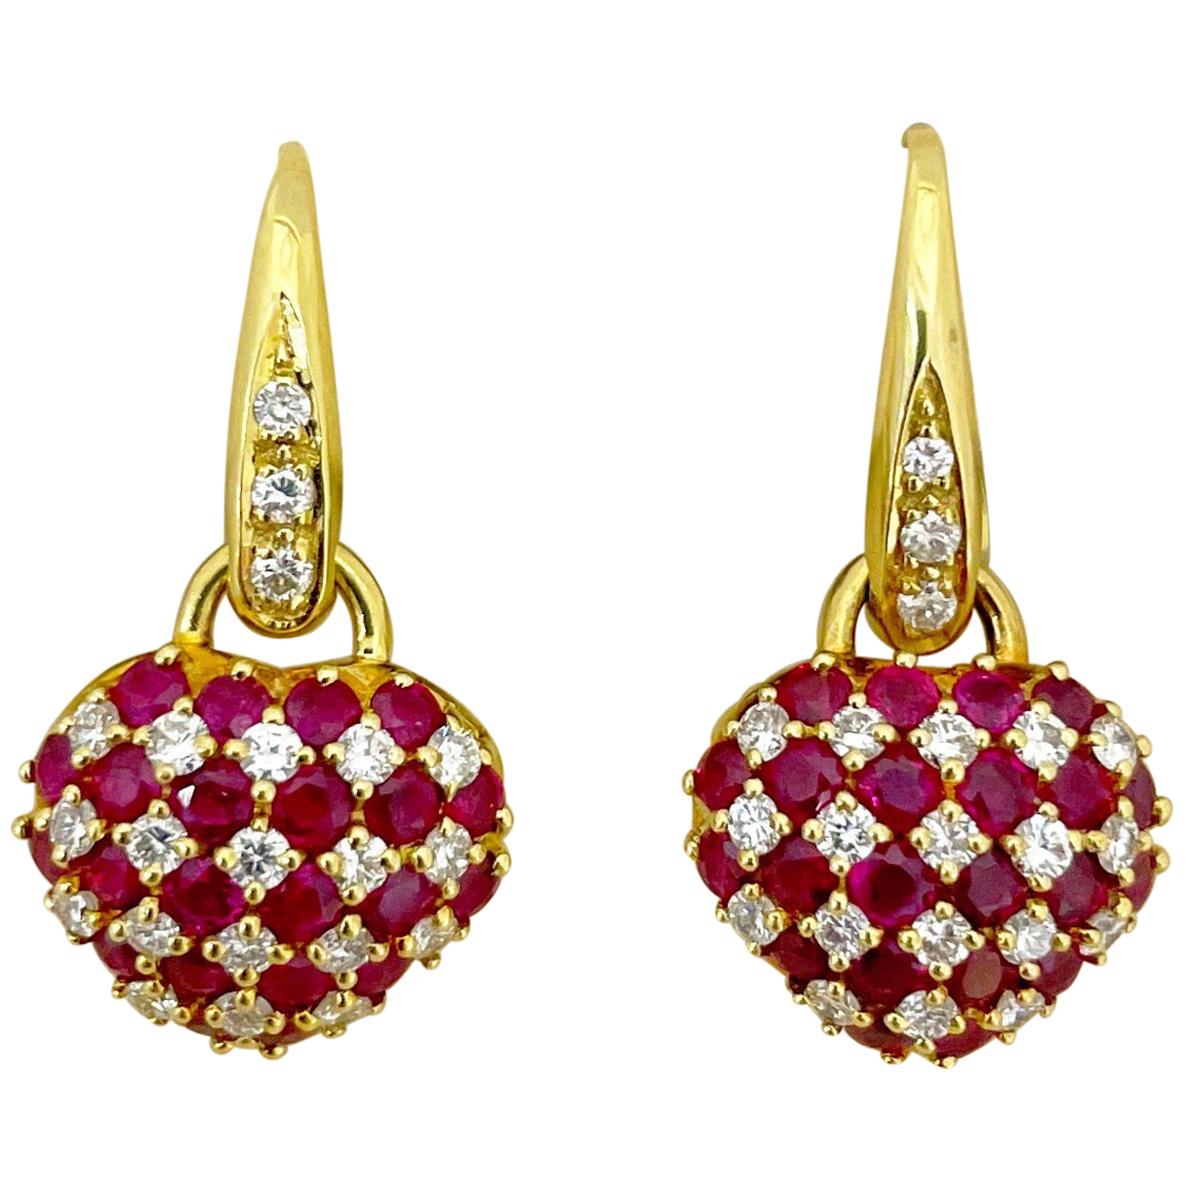 Cellini 18 Karat Gold Hanging Heart Earrings 2.49 Carat Ruby and 0.75 Ct Diamond For Sale